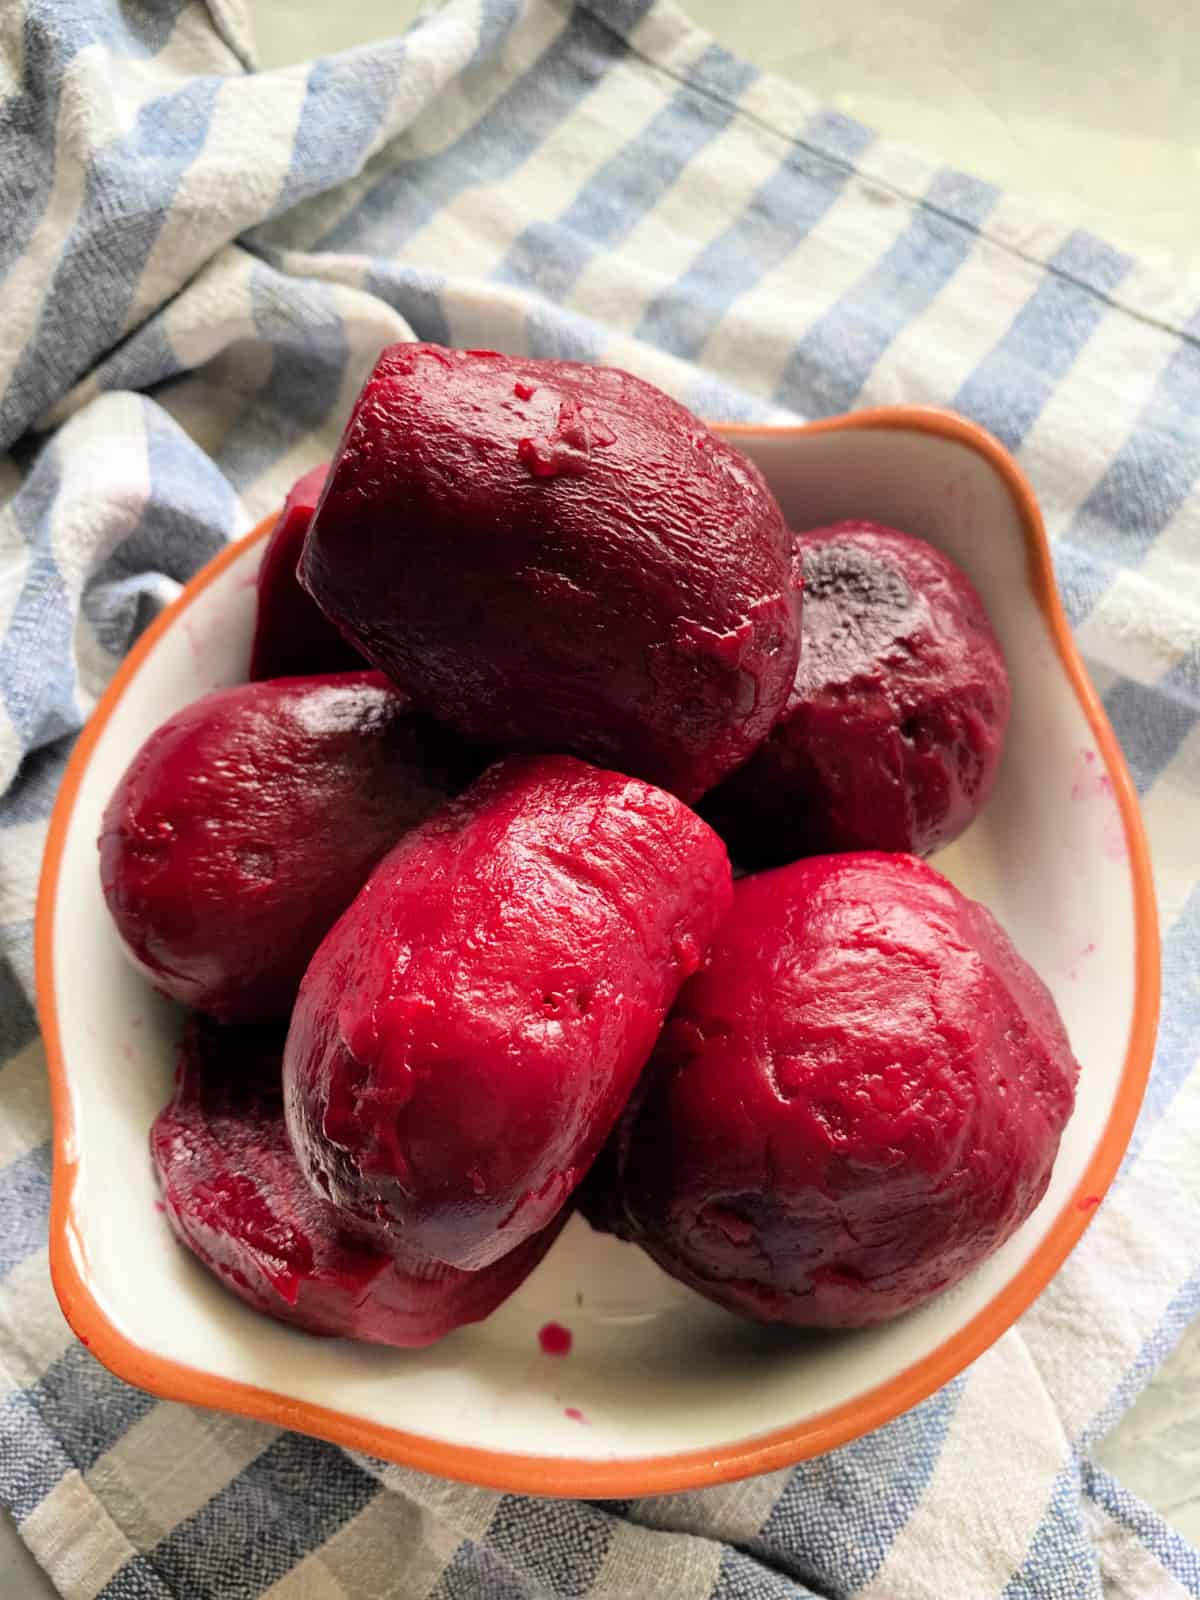 White bowl filled with cooked beets on a blue and white checkered cloth.